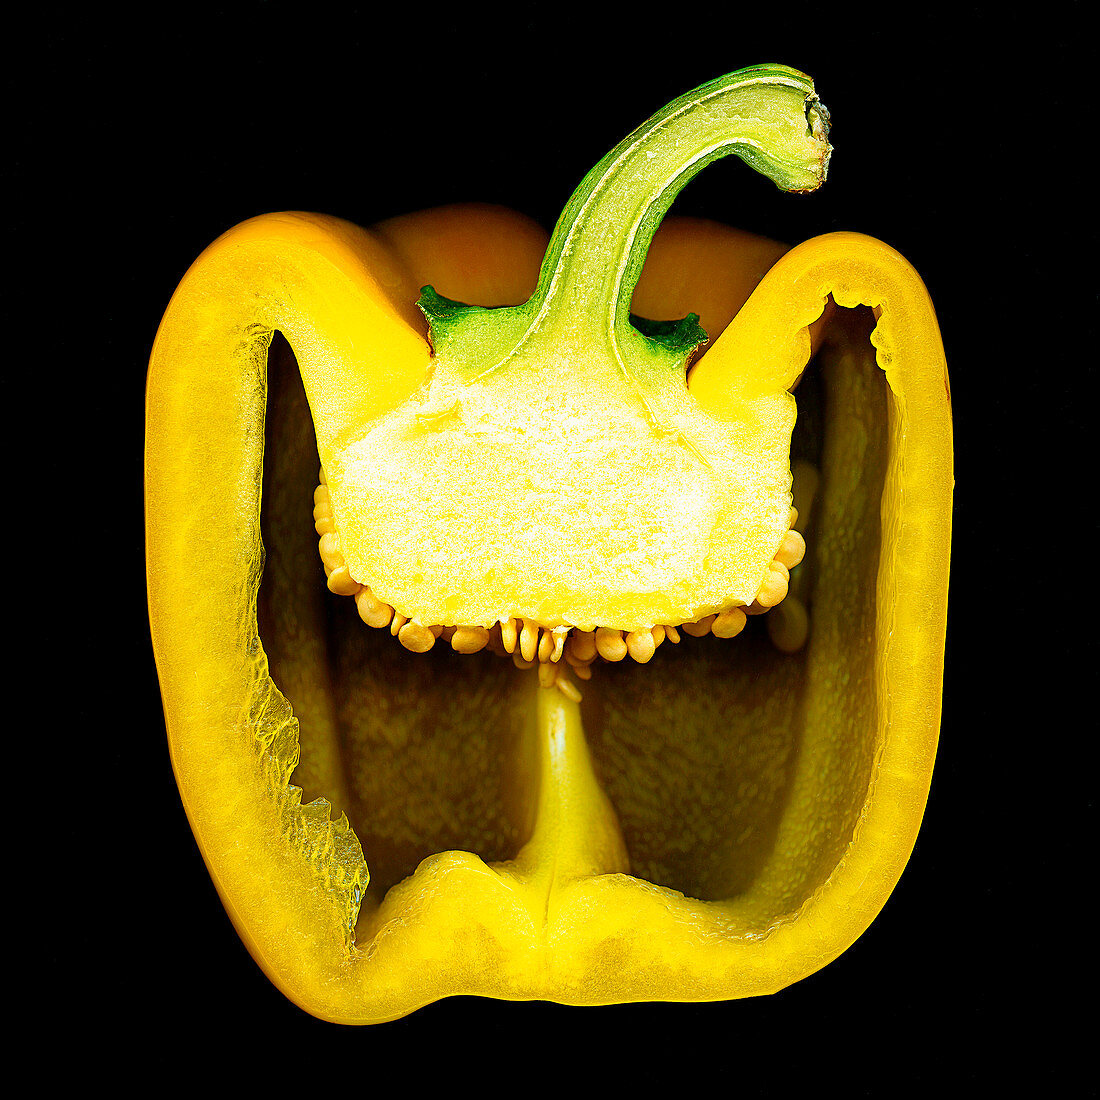 A sliced yellow pepper against a black background